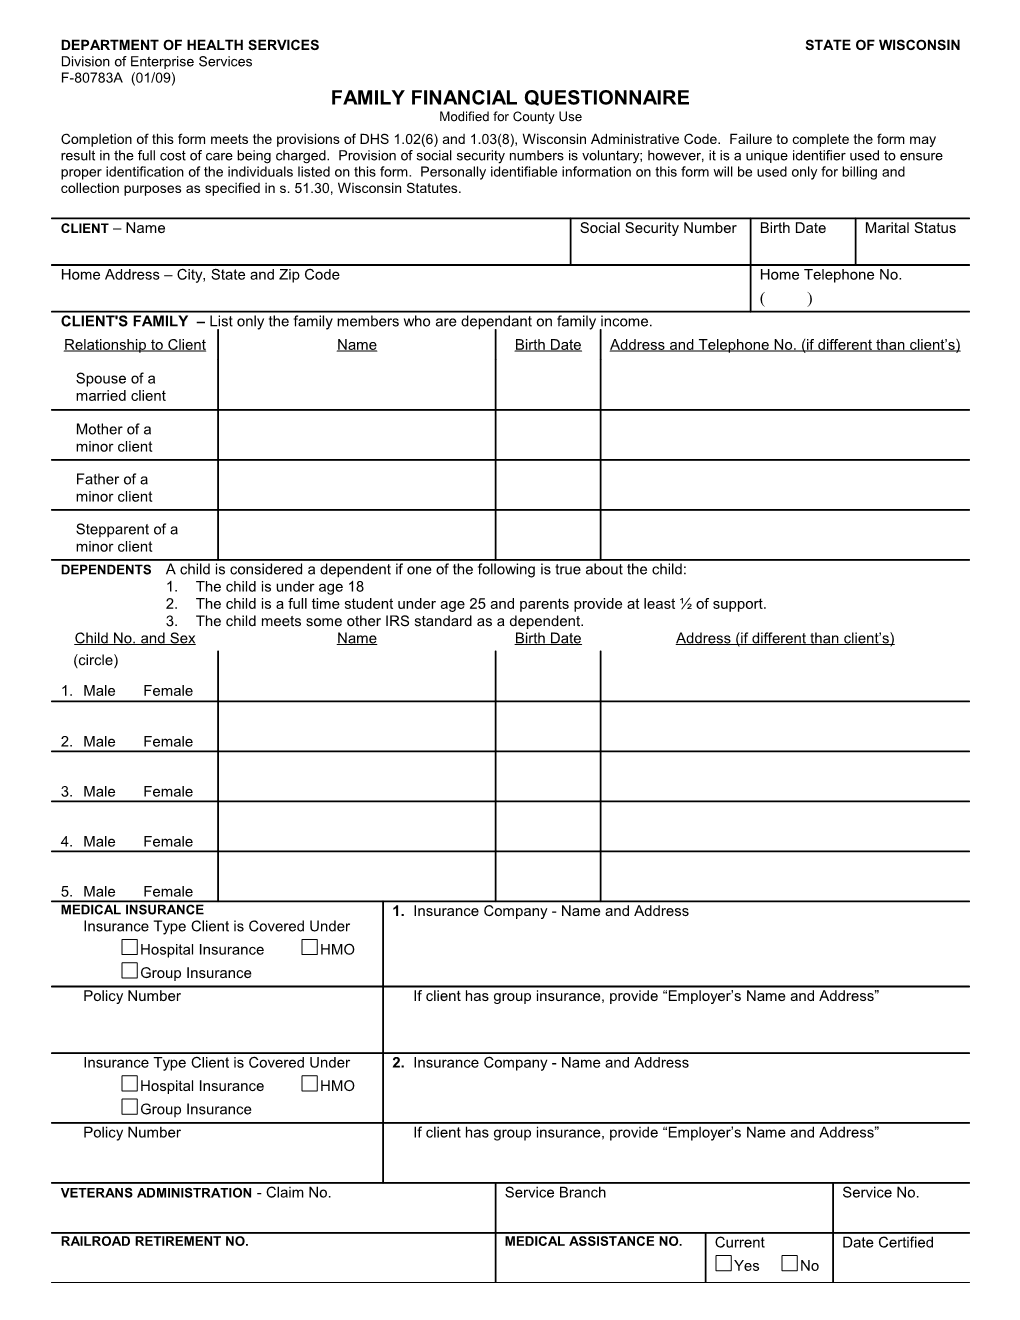 Family Financial Questionnaire - F-80783A